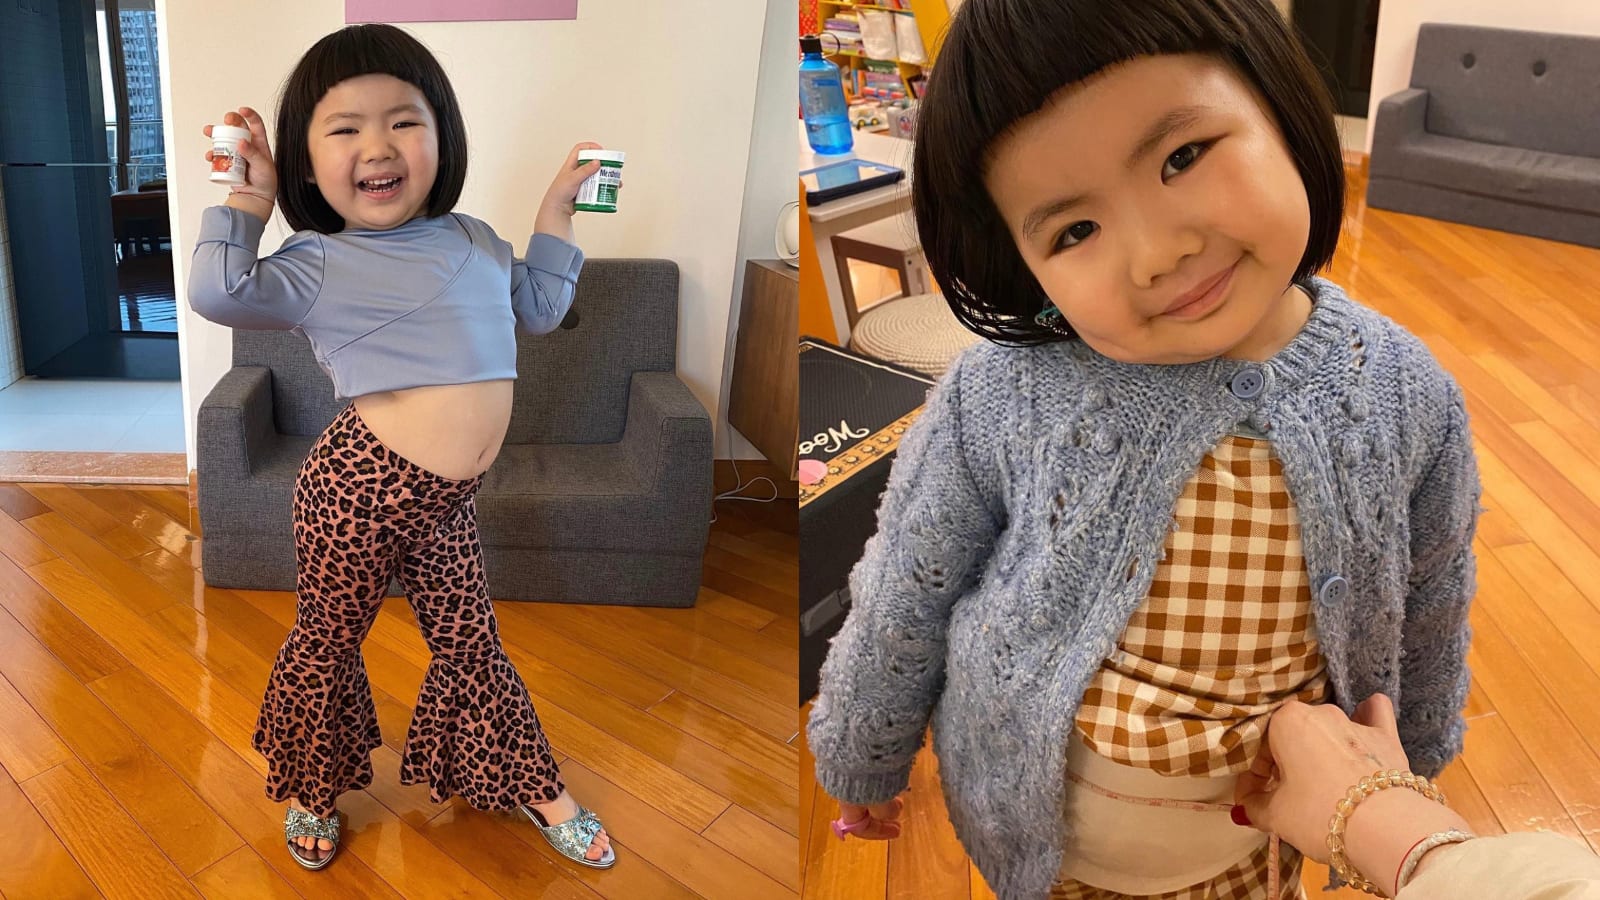 HK Actor Sam Lee’s Wife Shows Followers That Their 4-Year-Old Daughter Has A 26-Inch Waist